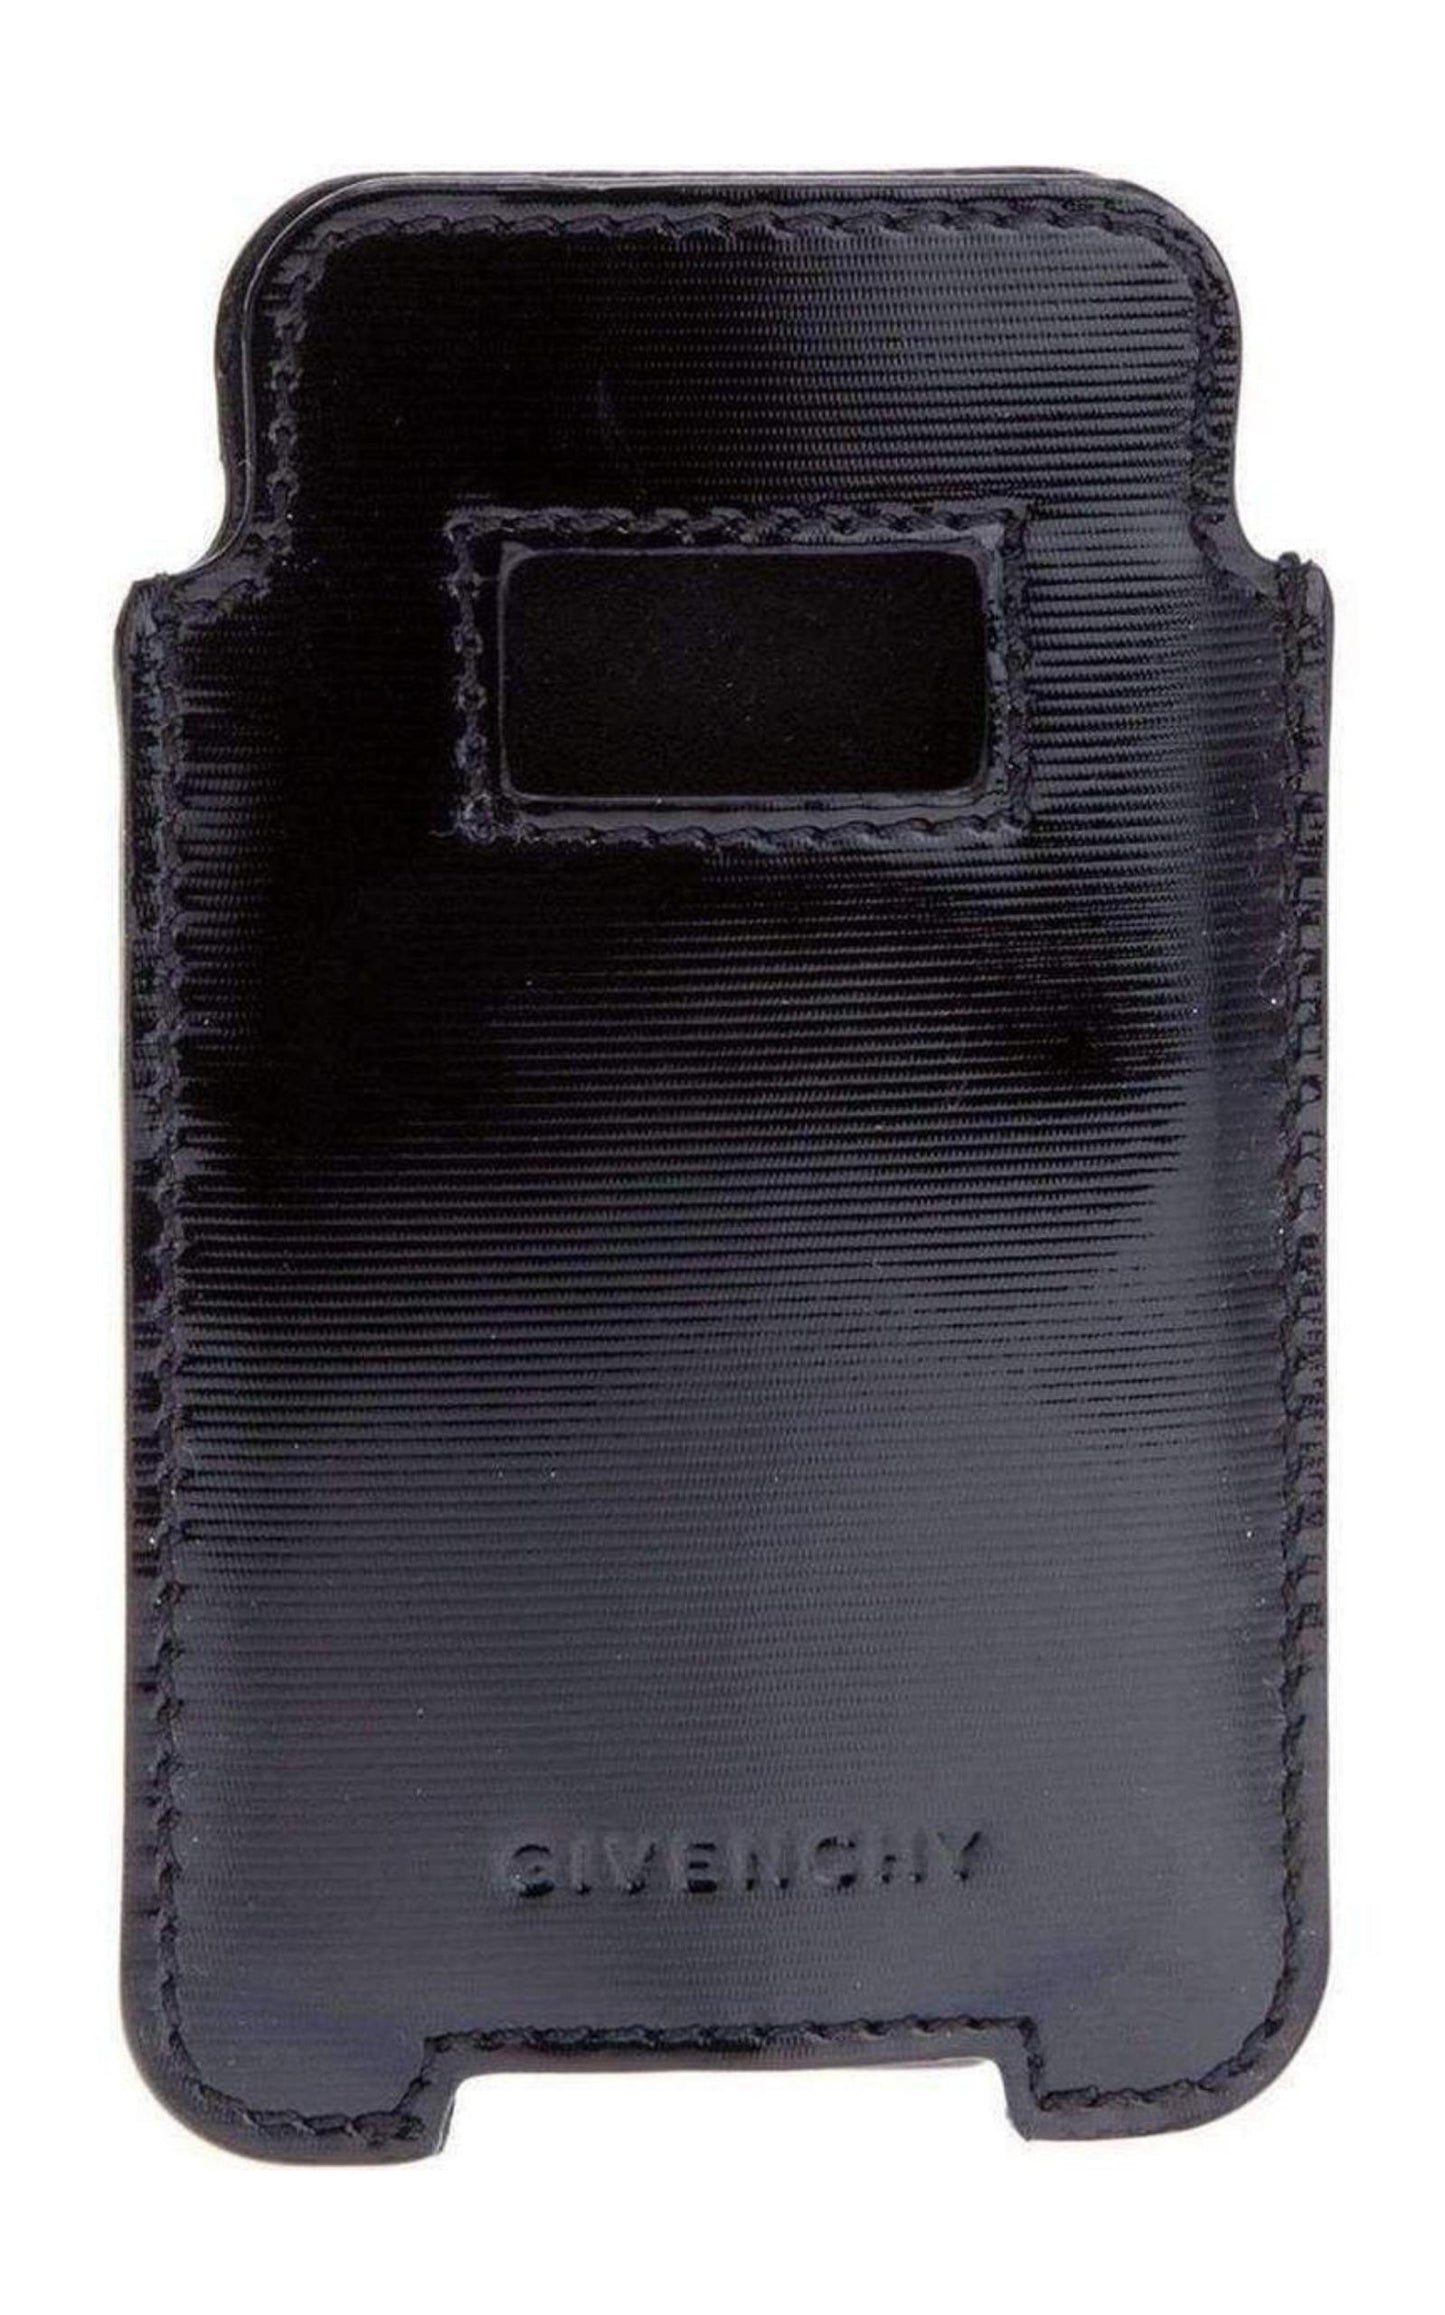  GivenchyGivenchy Black Textured Leather Phone or Credit Card Case - Runway Catalog